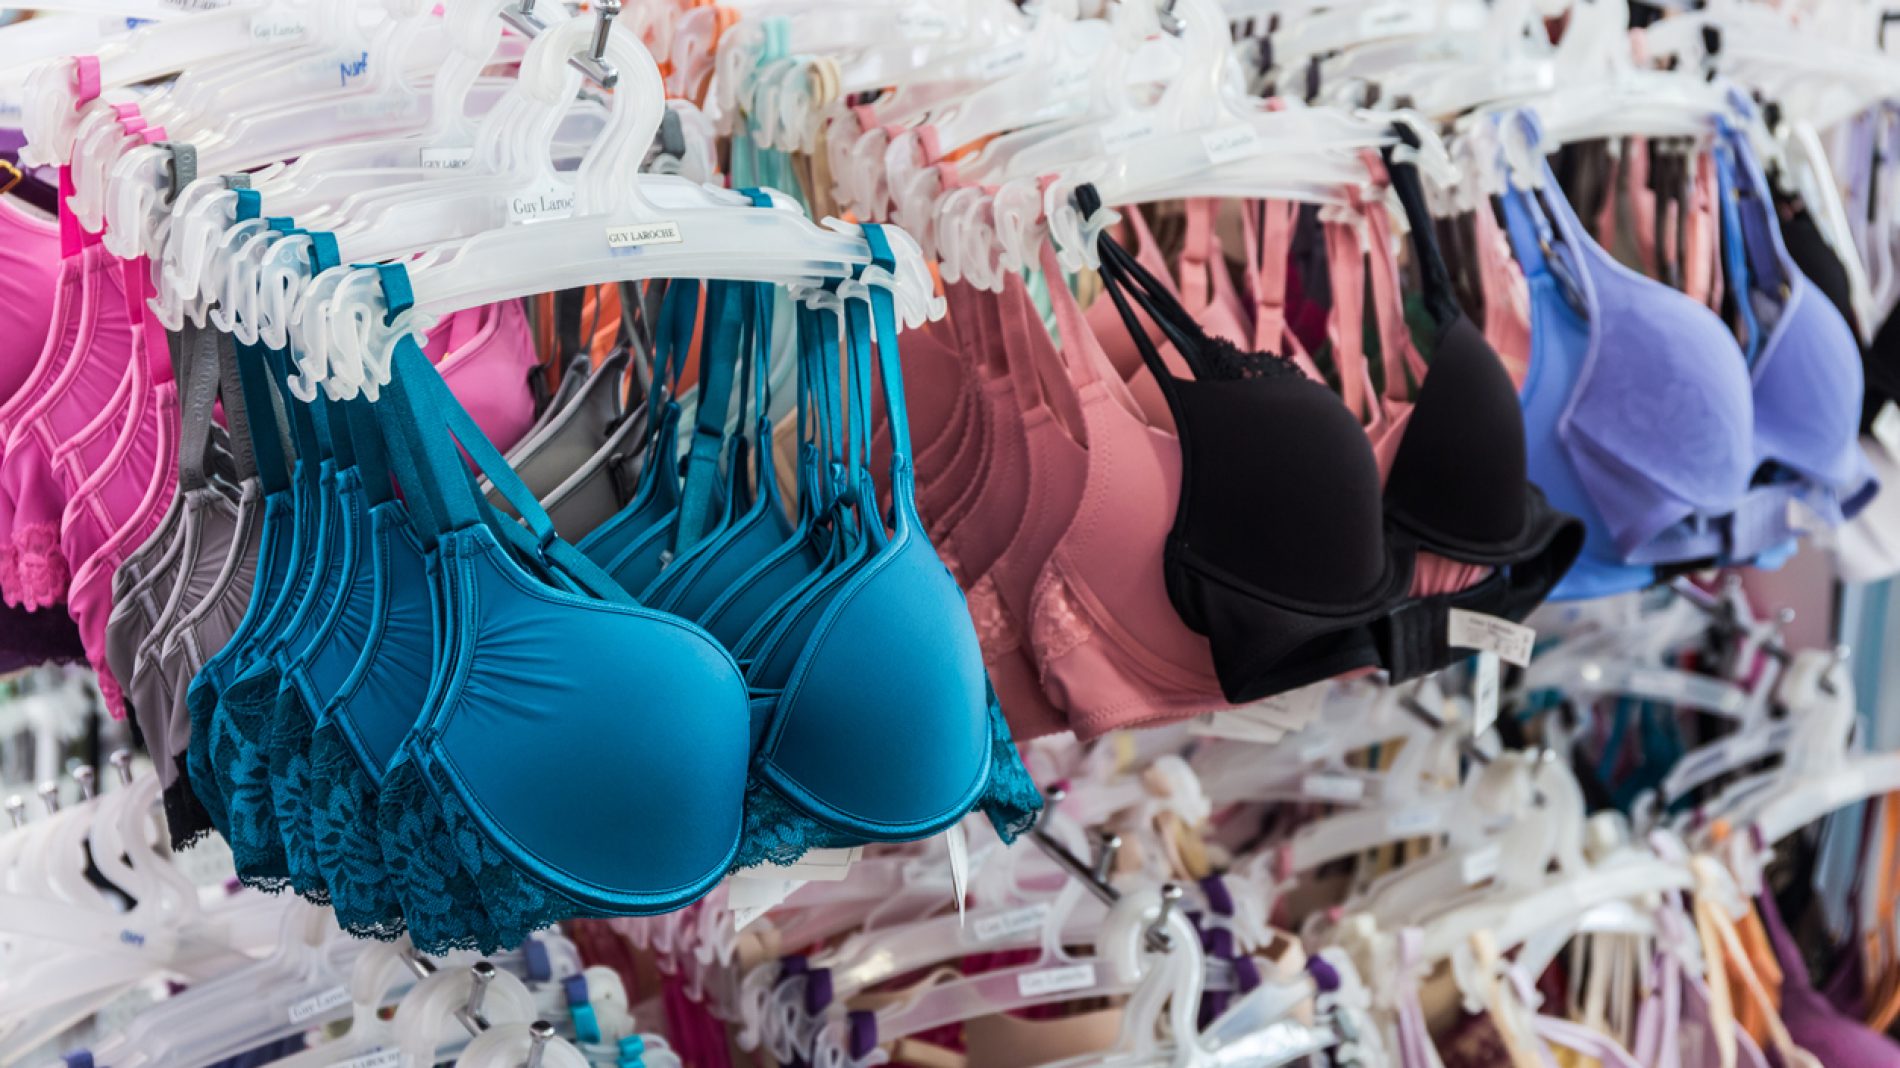 Row of colorful bras.